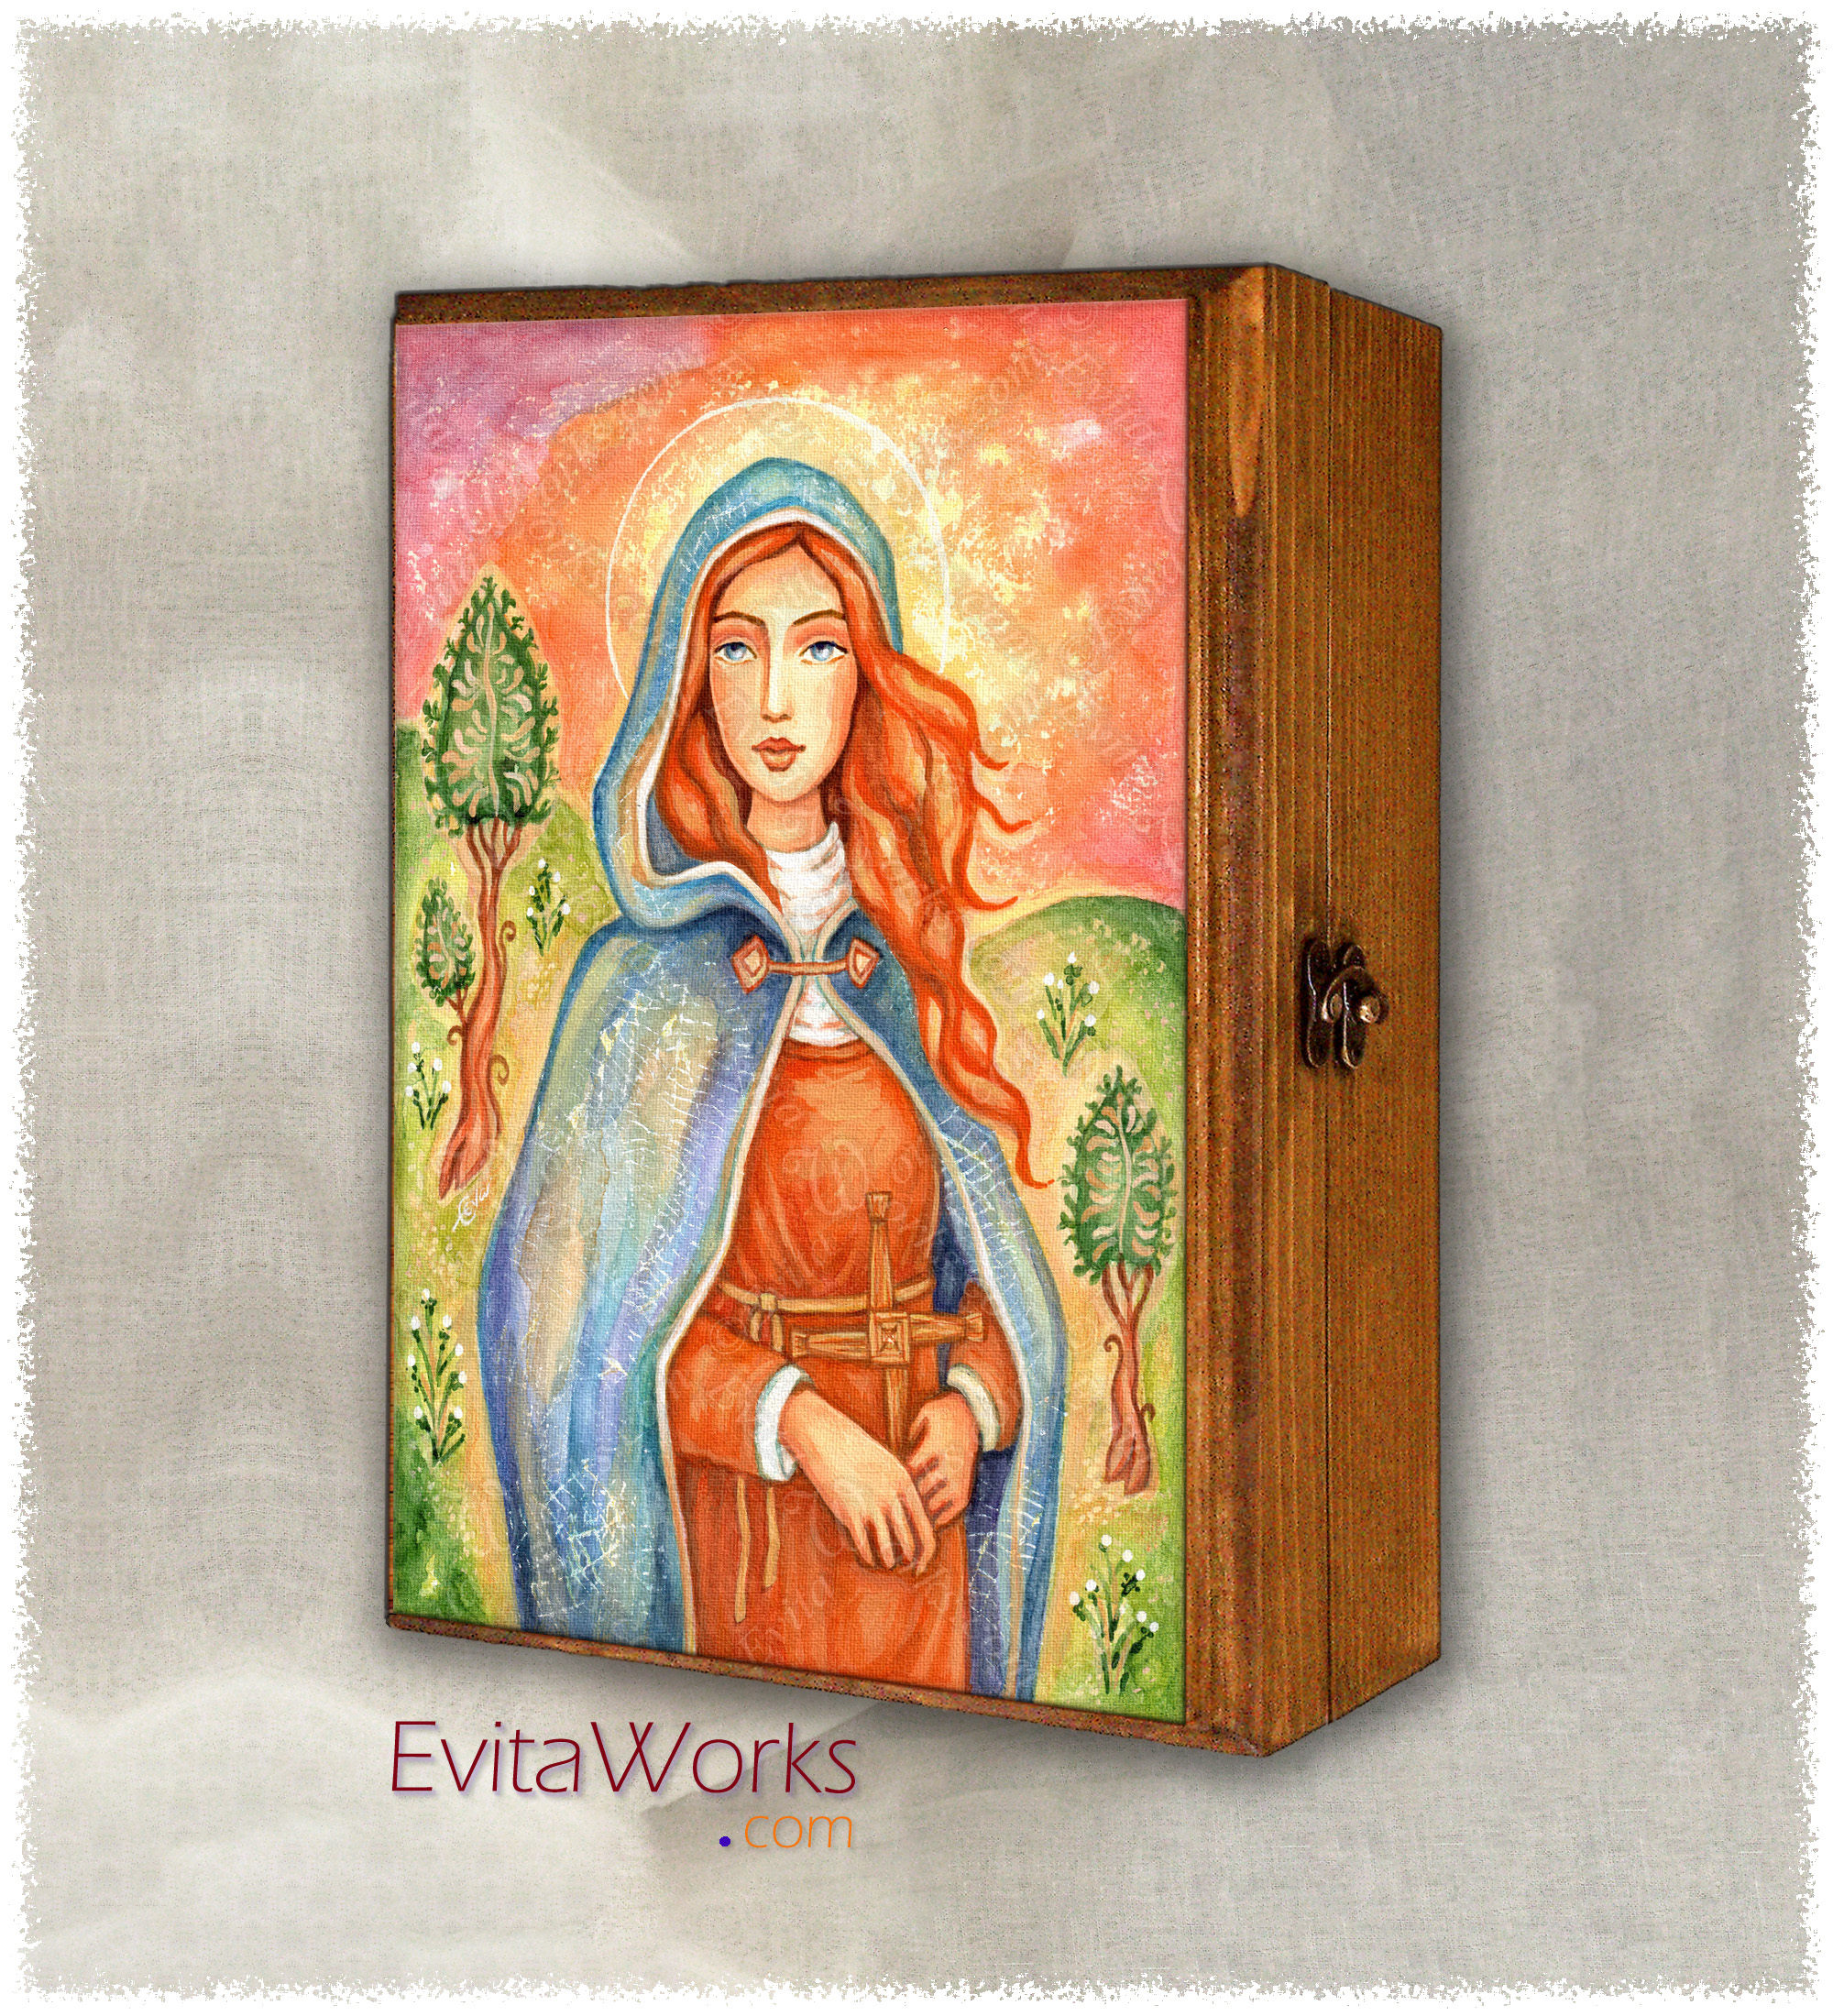 Hit to learn about "Saint Brigit of Ireland, Irish holy woman" on jewelboxes